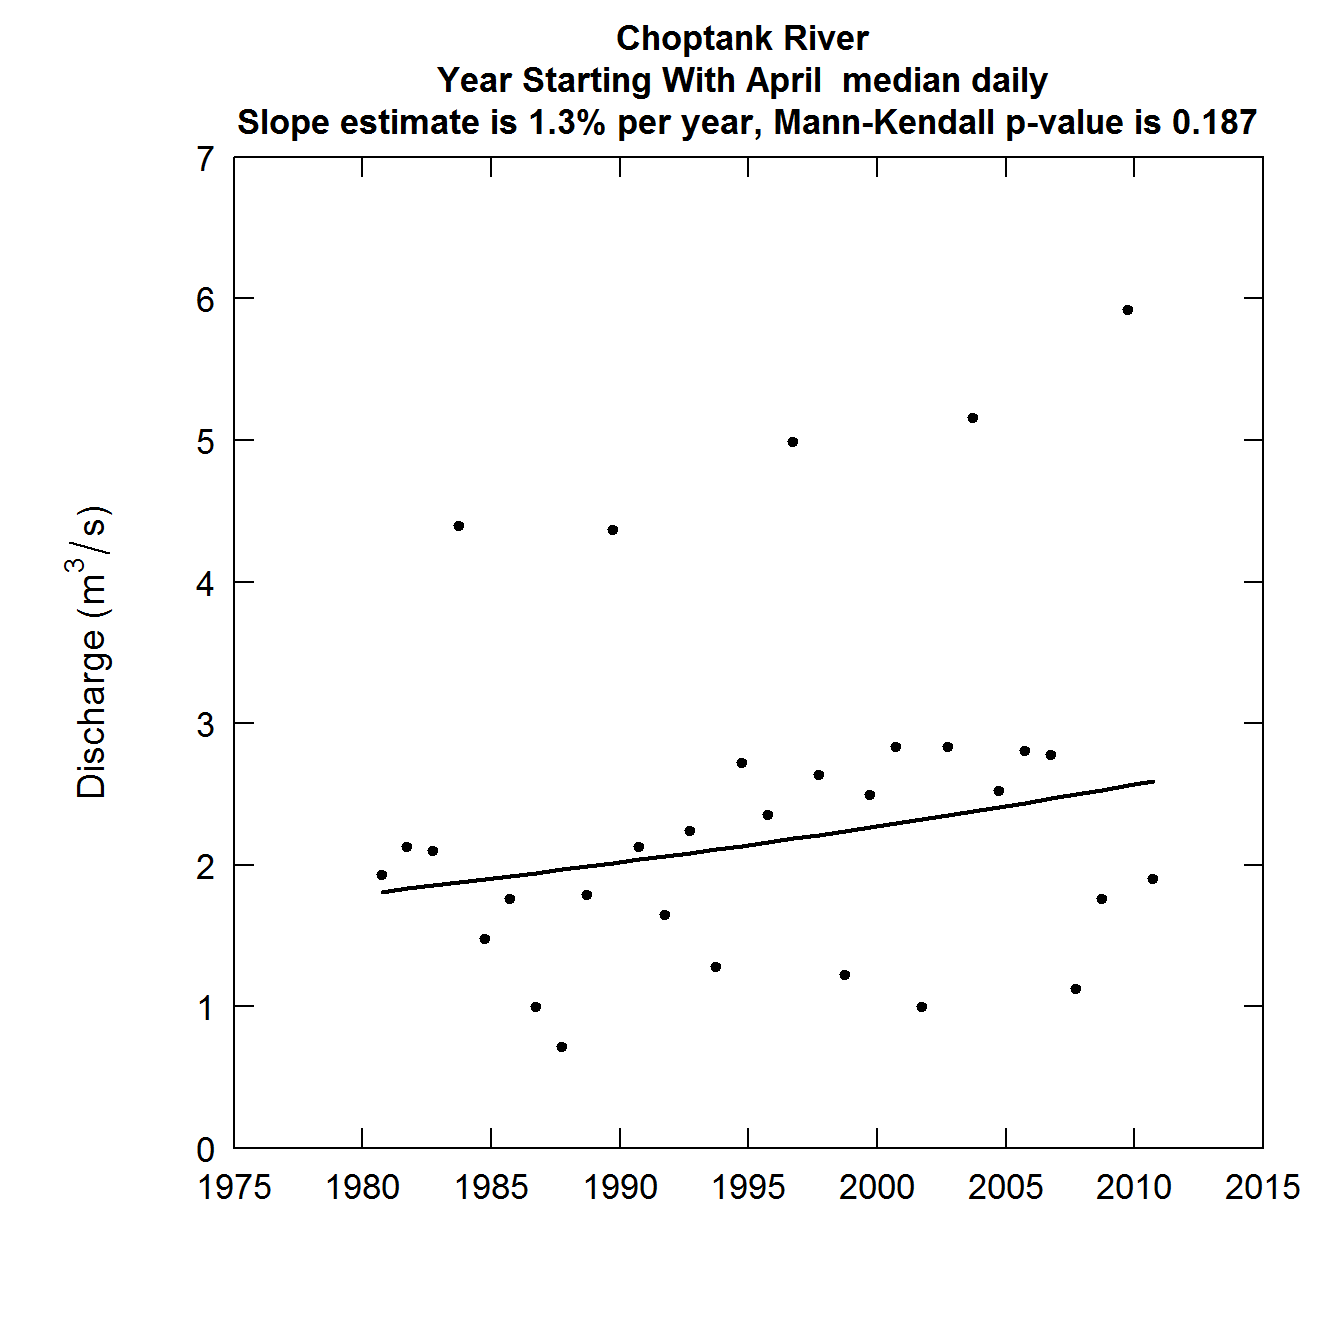 Discharge as a function of Year annual median day